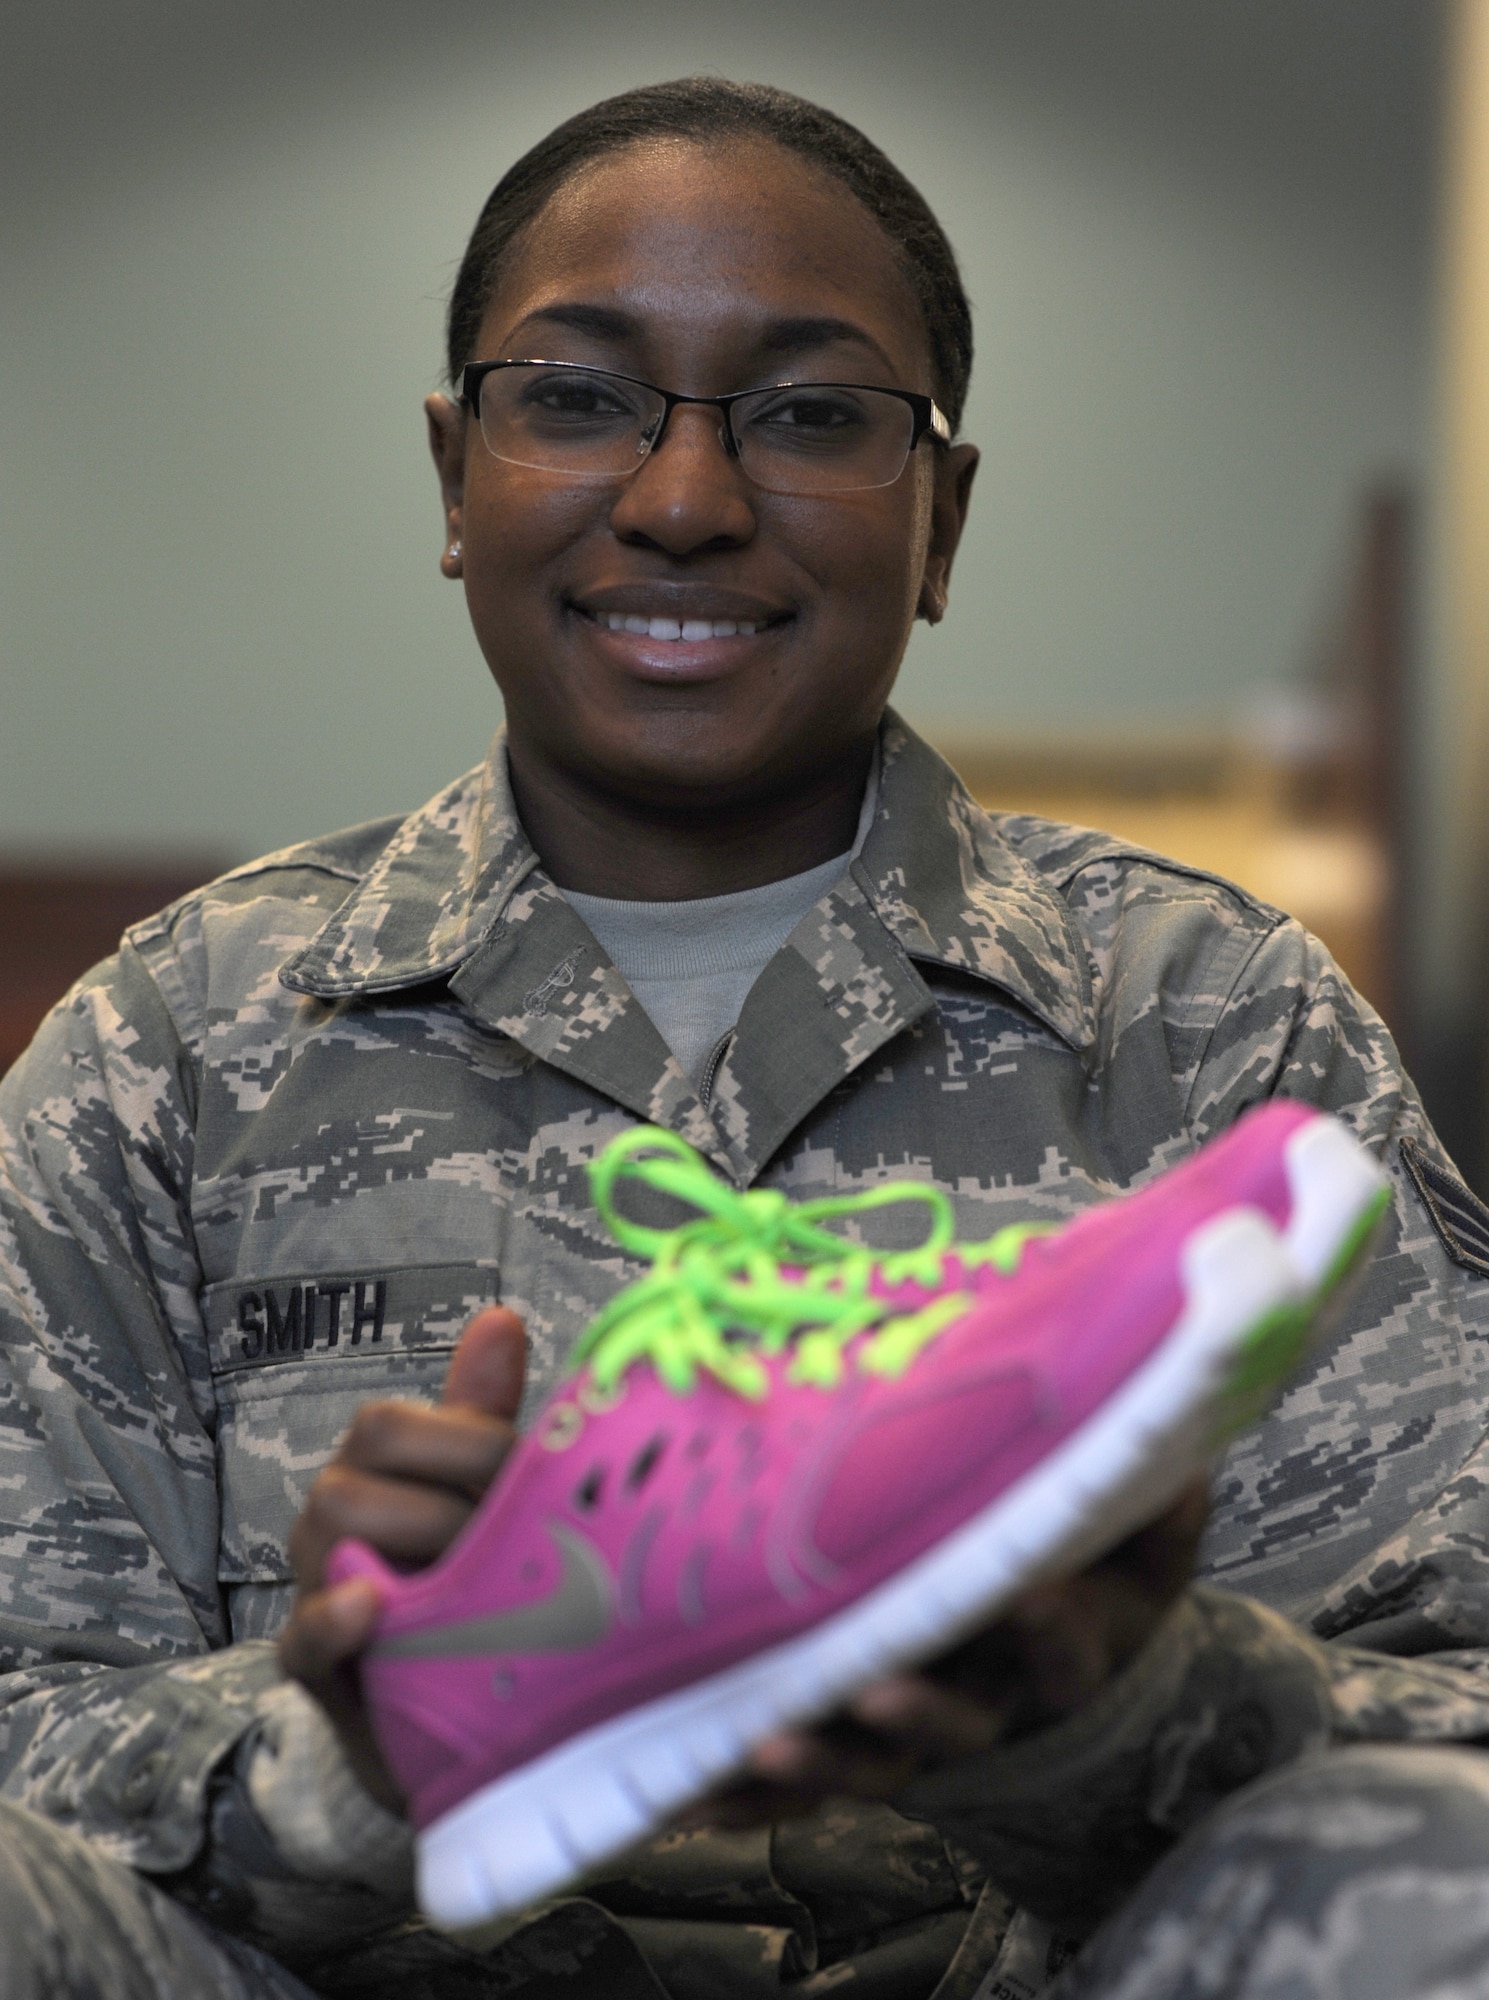 “I’m really excited to wear colored shoes. As soon as I read the [Air Force Instruction] change I went to the mall and bought a bright pink pair of running shoes,” said Senior Airman Rashana Smith, 366th Logistics Readiness Squadron assistant to commanders support staff. The revision to AFI 36-2903 paragraph 7.1.6.2. states, “There are no restrictions on the color of the athletic shoes.” (U.S. Air Force photo by Airman 1st Class Brittany A. Chase/Released)